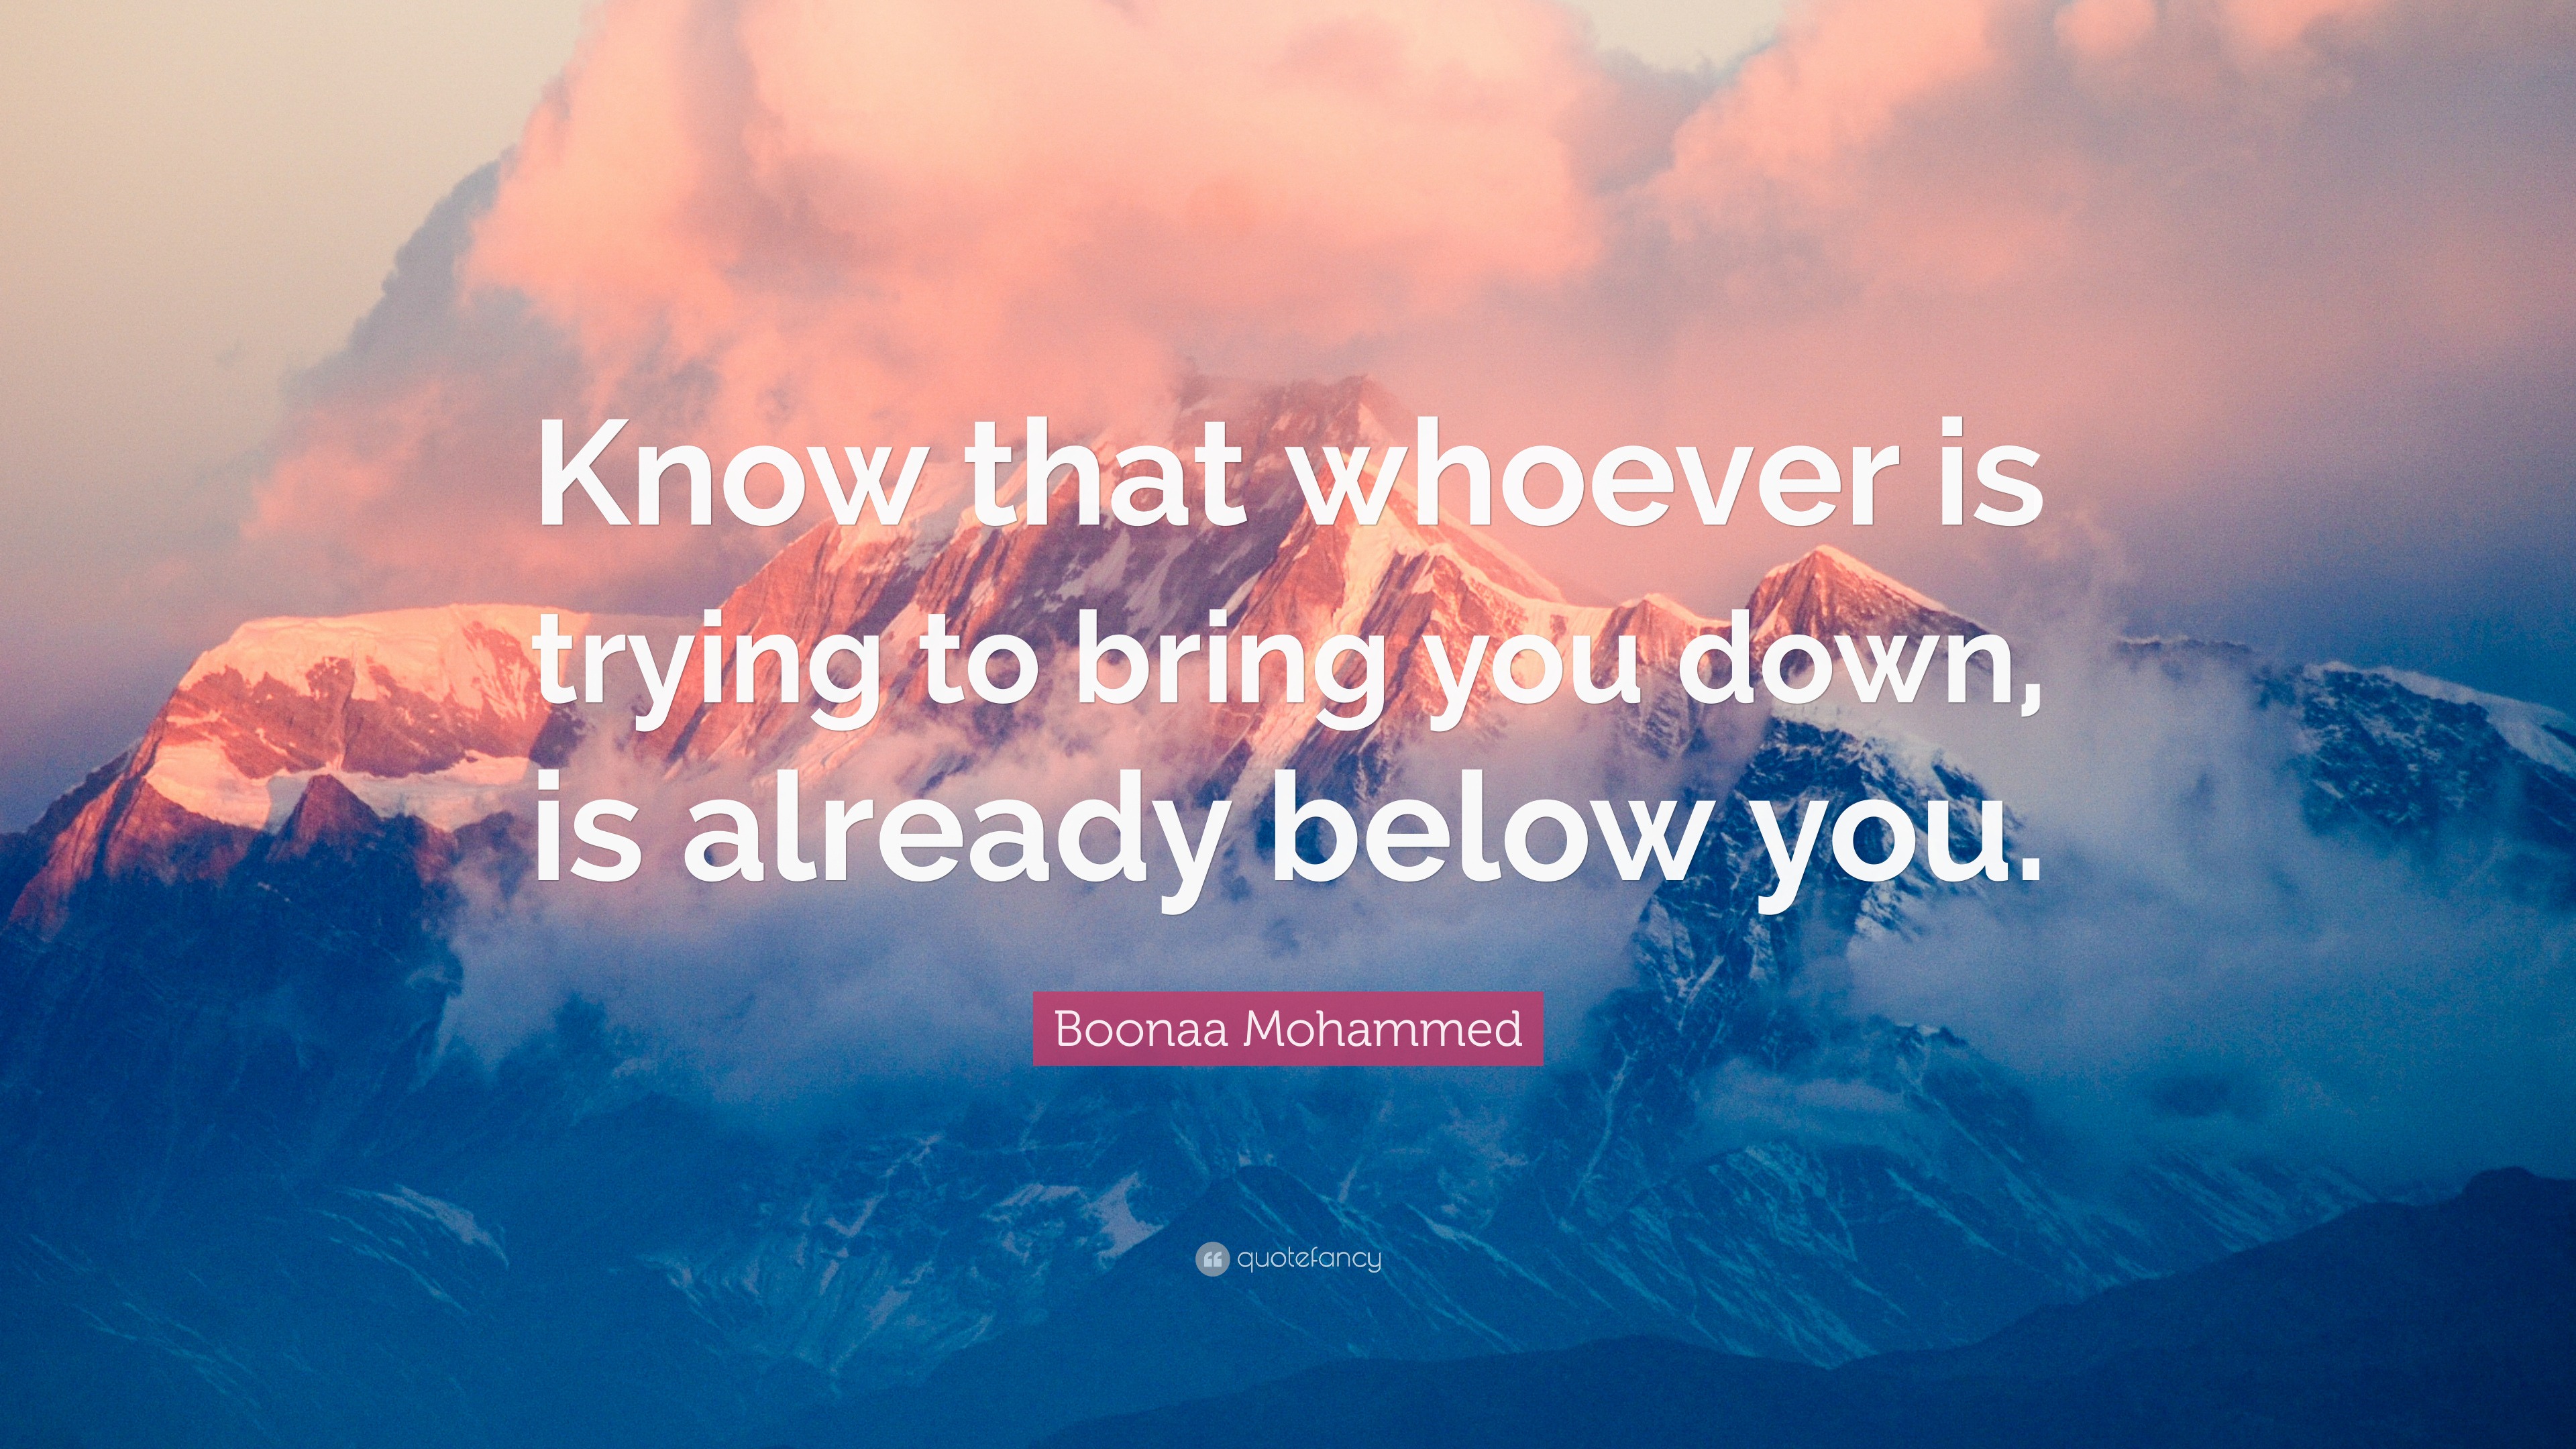 Boonaa Mohammed Quote “know That Whoever Is Trying To Bring You Down Is Already Below You” 